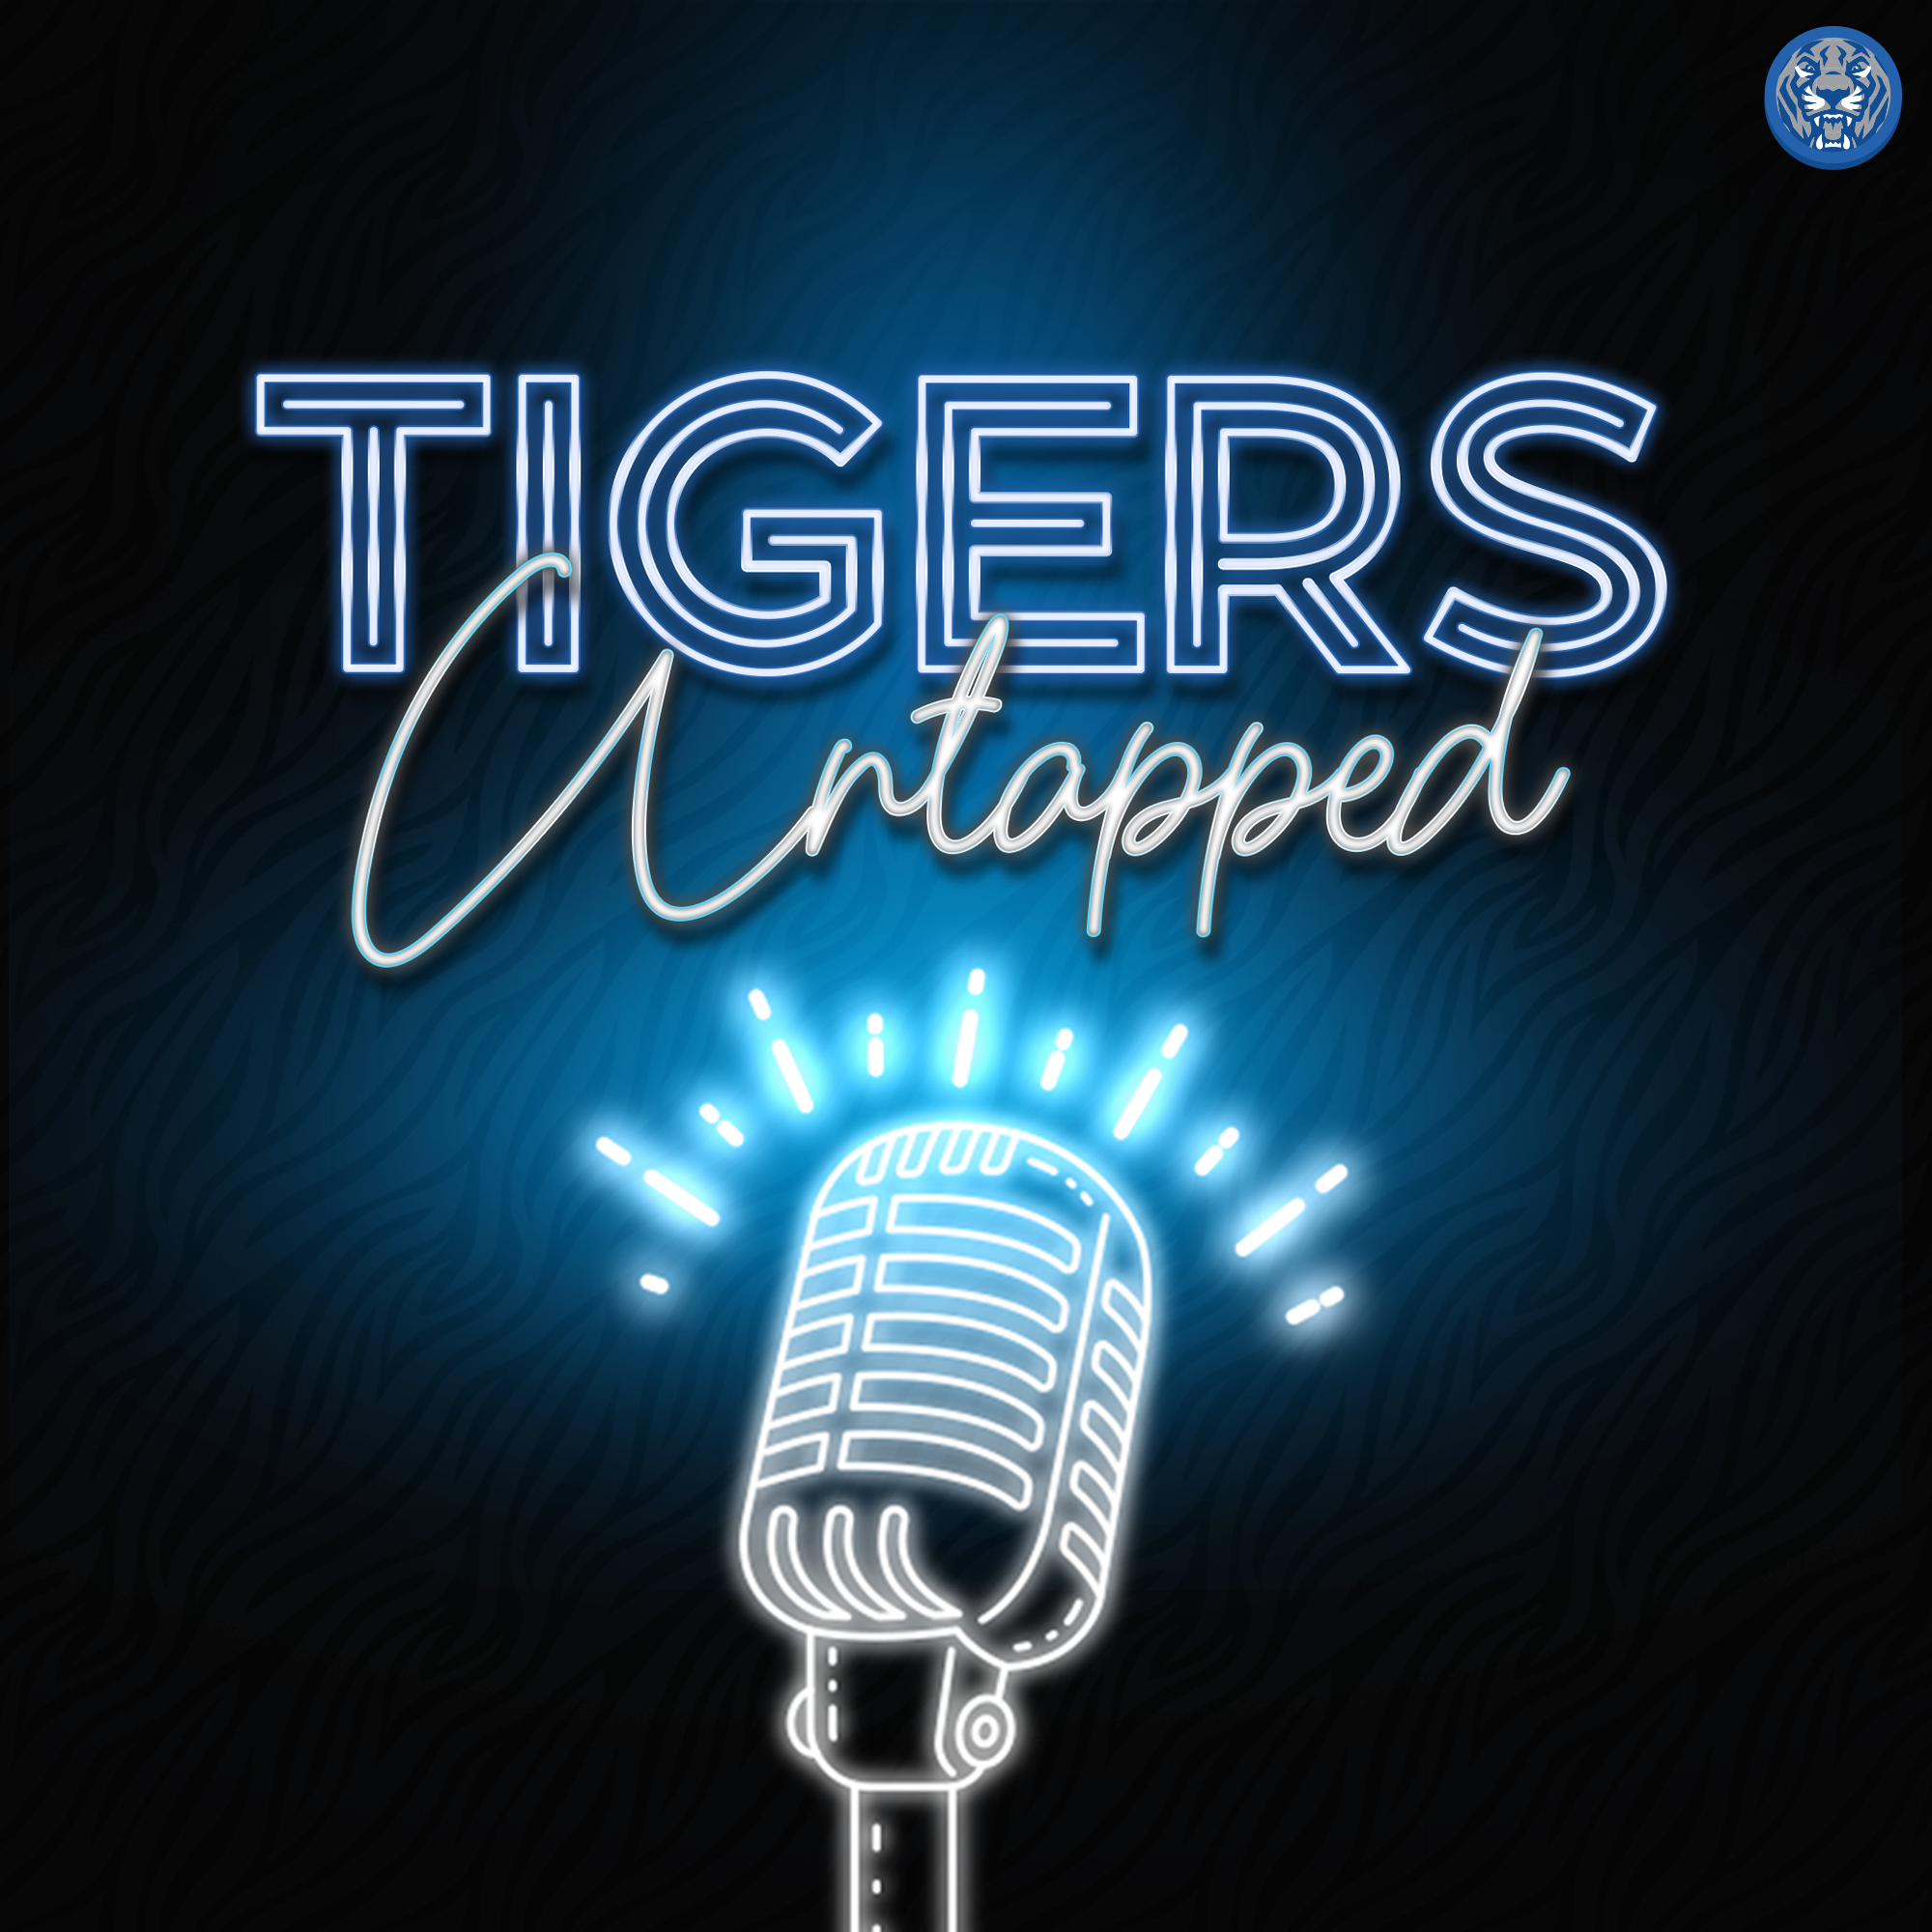 Featured image for “Tigers Untapped Ep 15: The Biggest Game in 30 Years”